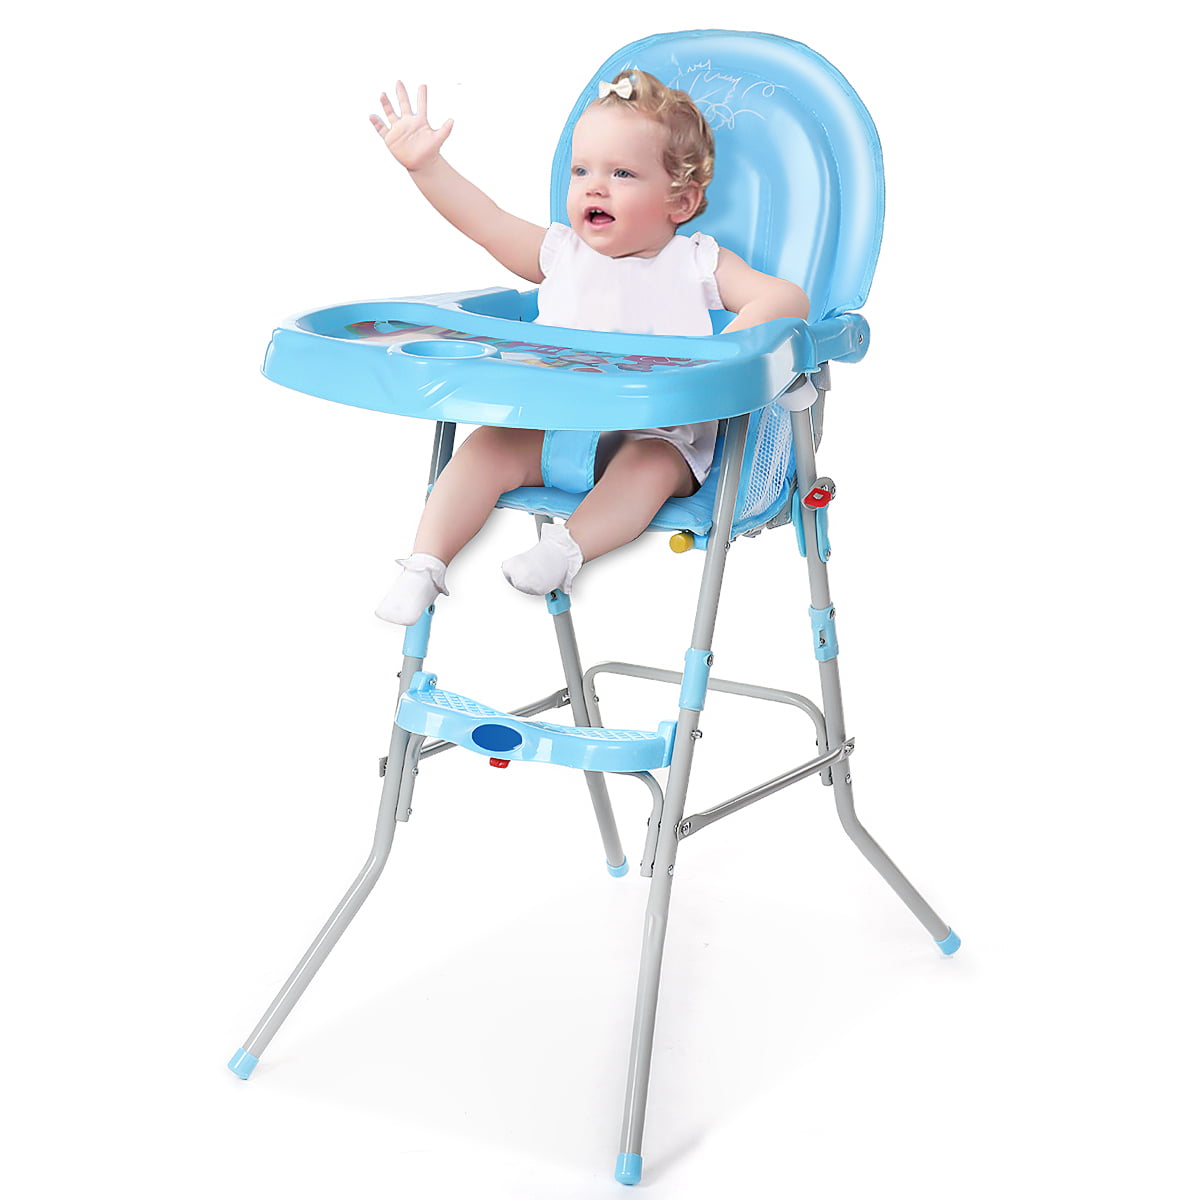 Caretero POP High Chair baby Highchair Infant Child Feeding Next Day Delivery 